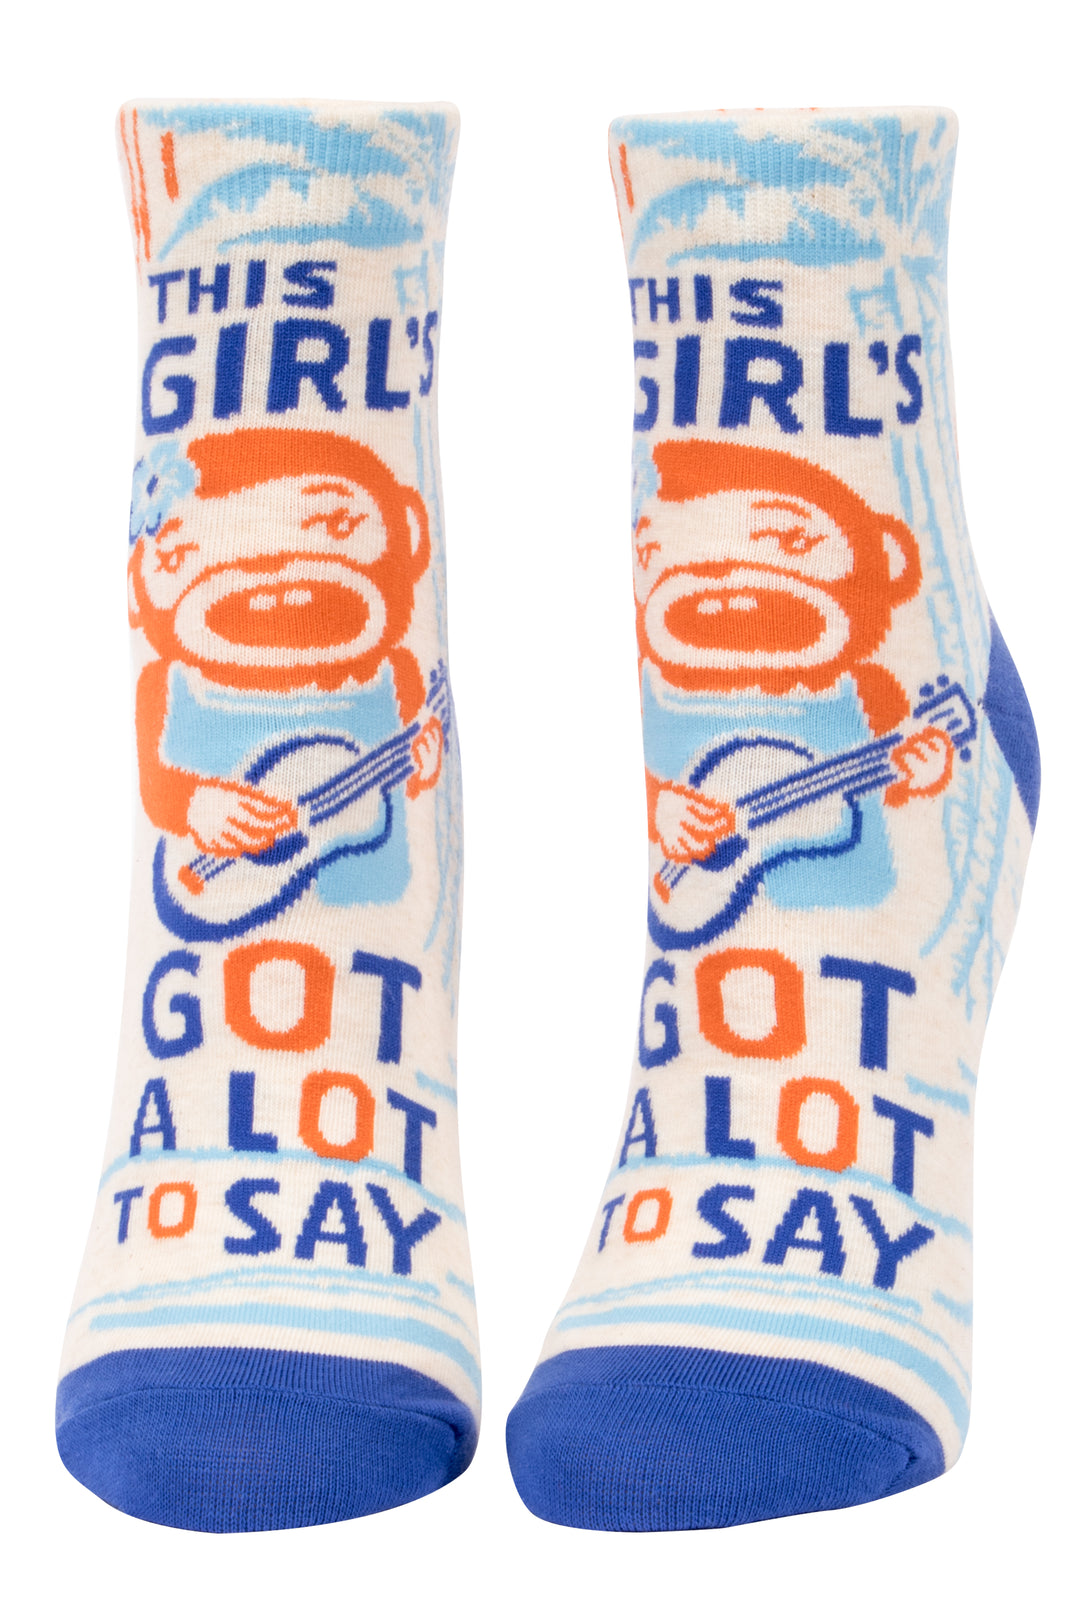 Blue Q Girl's Got A Lot To Say Women's Ankle Sock